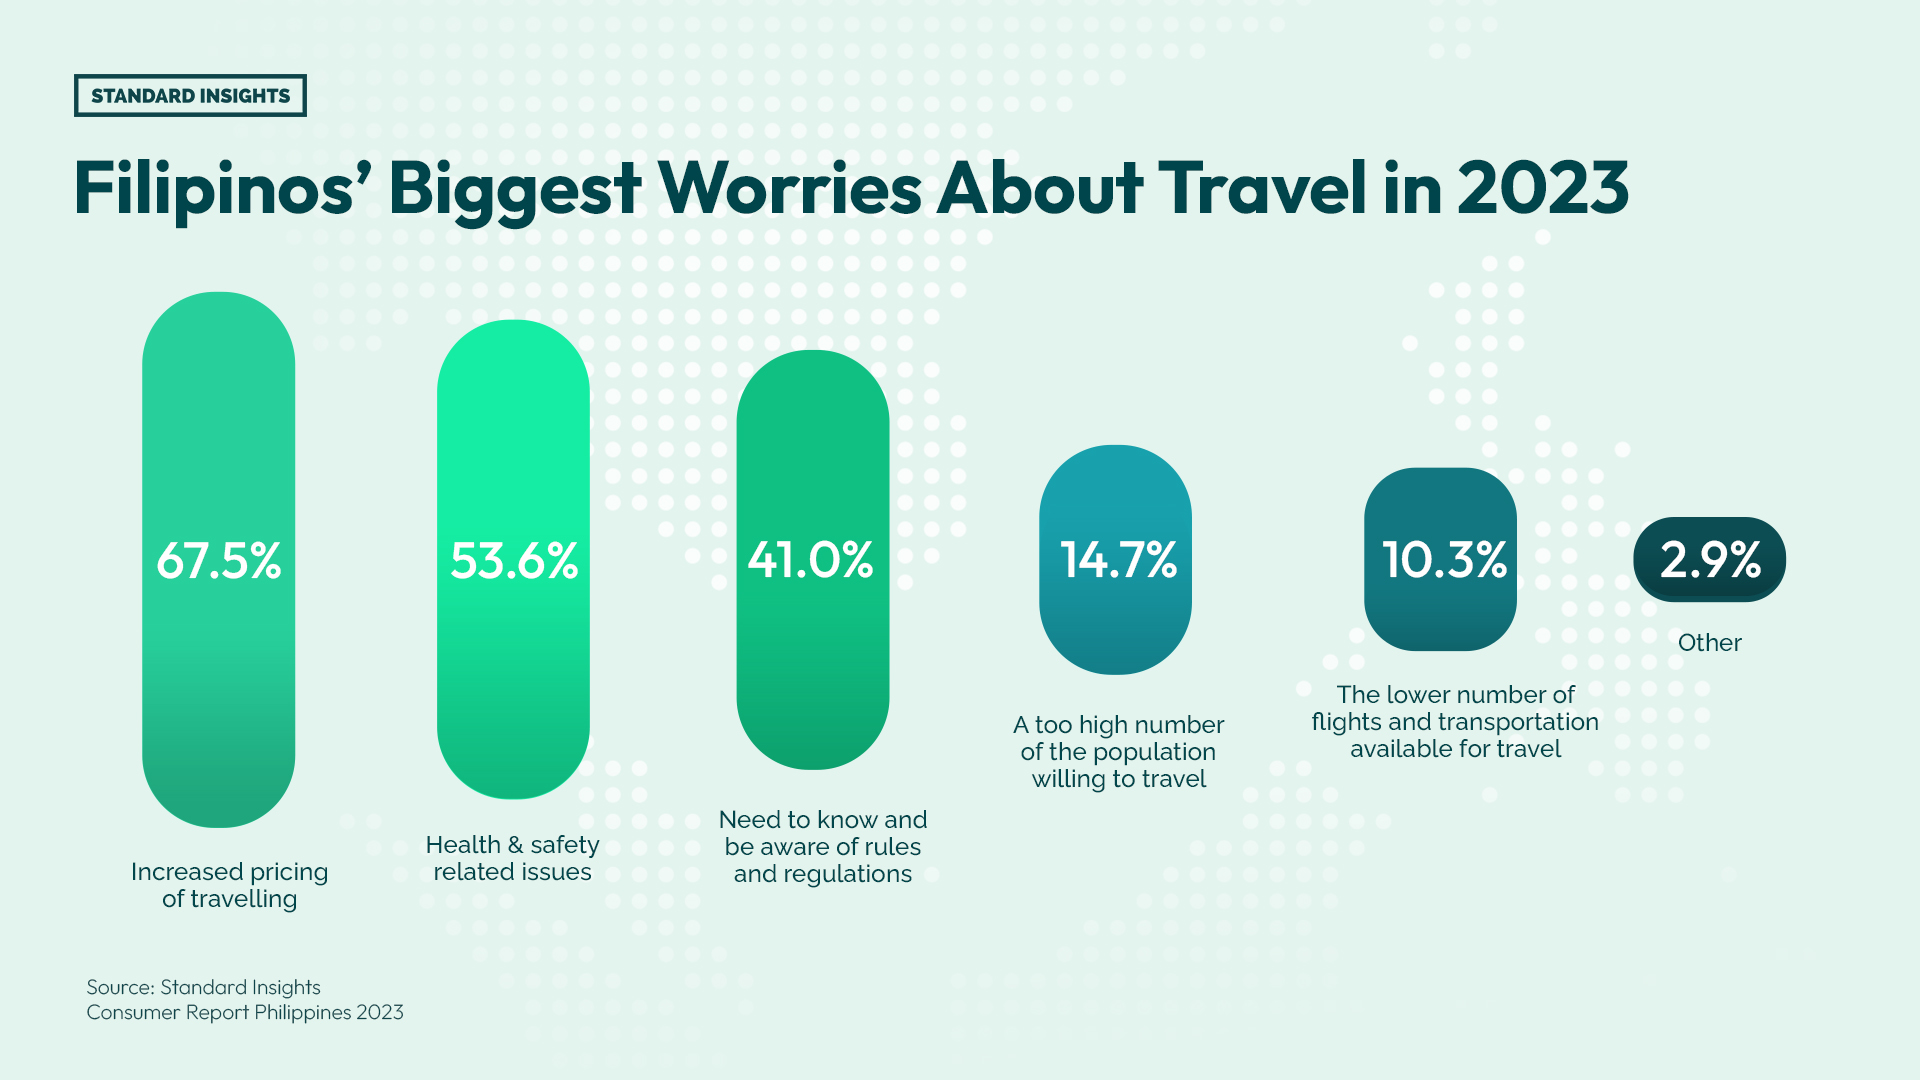 Standard Insights' survey results revealing Filipinos' biggest worries about travel in 2023